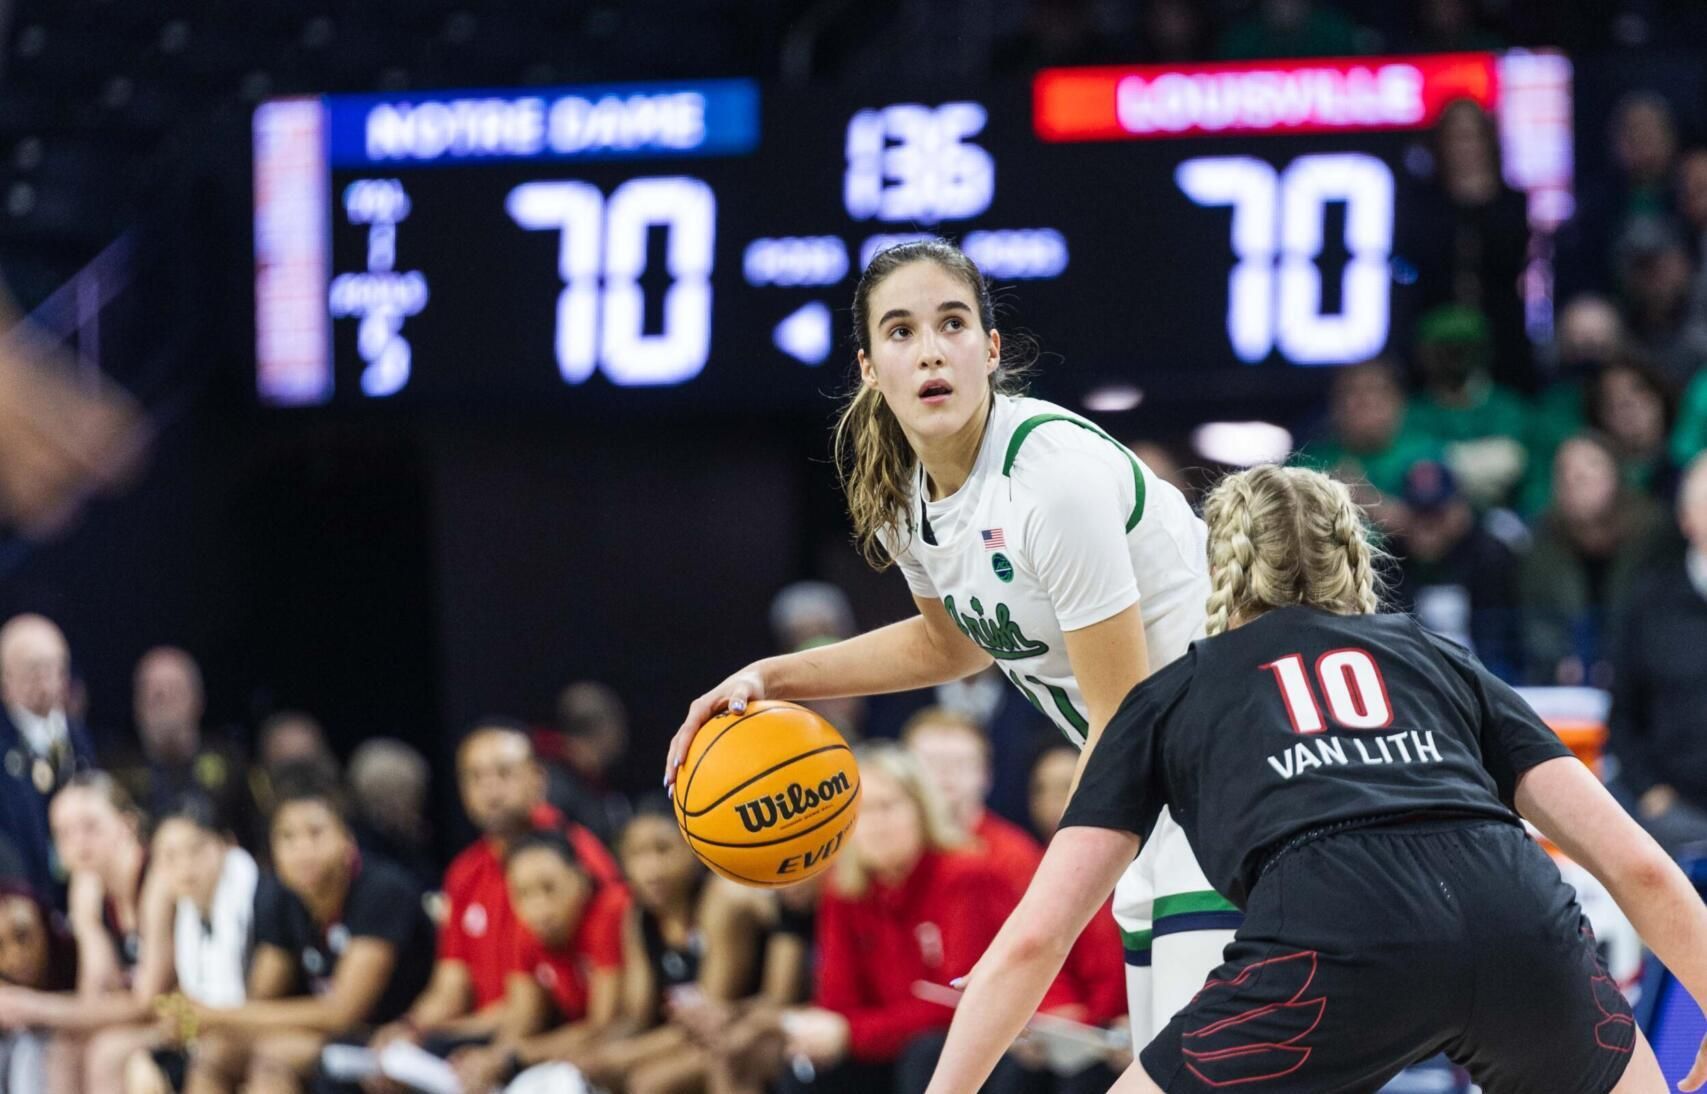 Ursuline's Sonia Citron is 2019-20 girls basketball Player of the Year